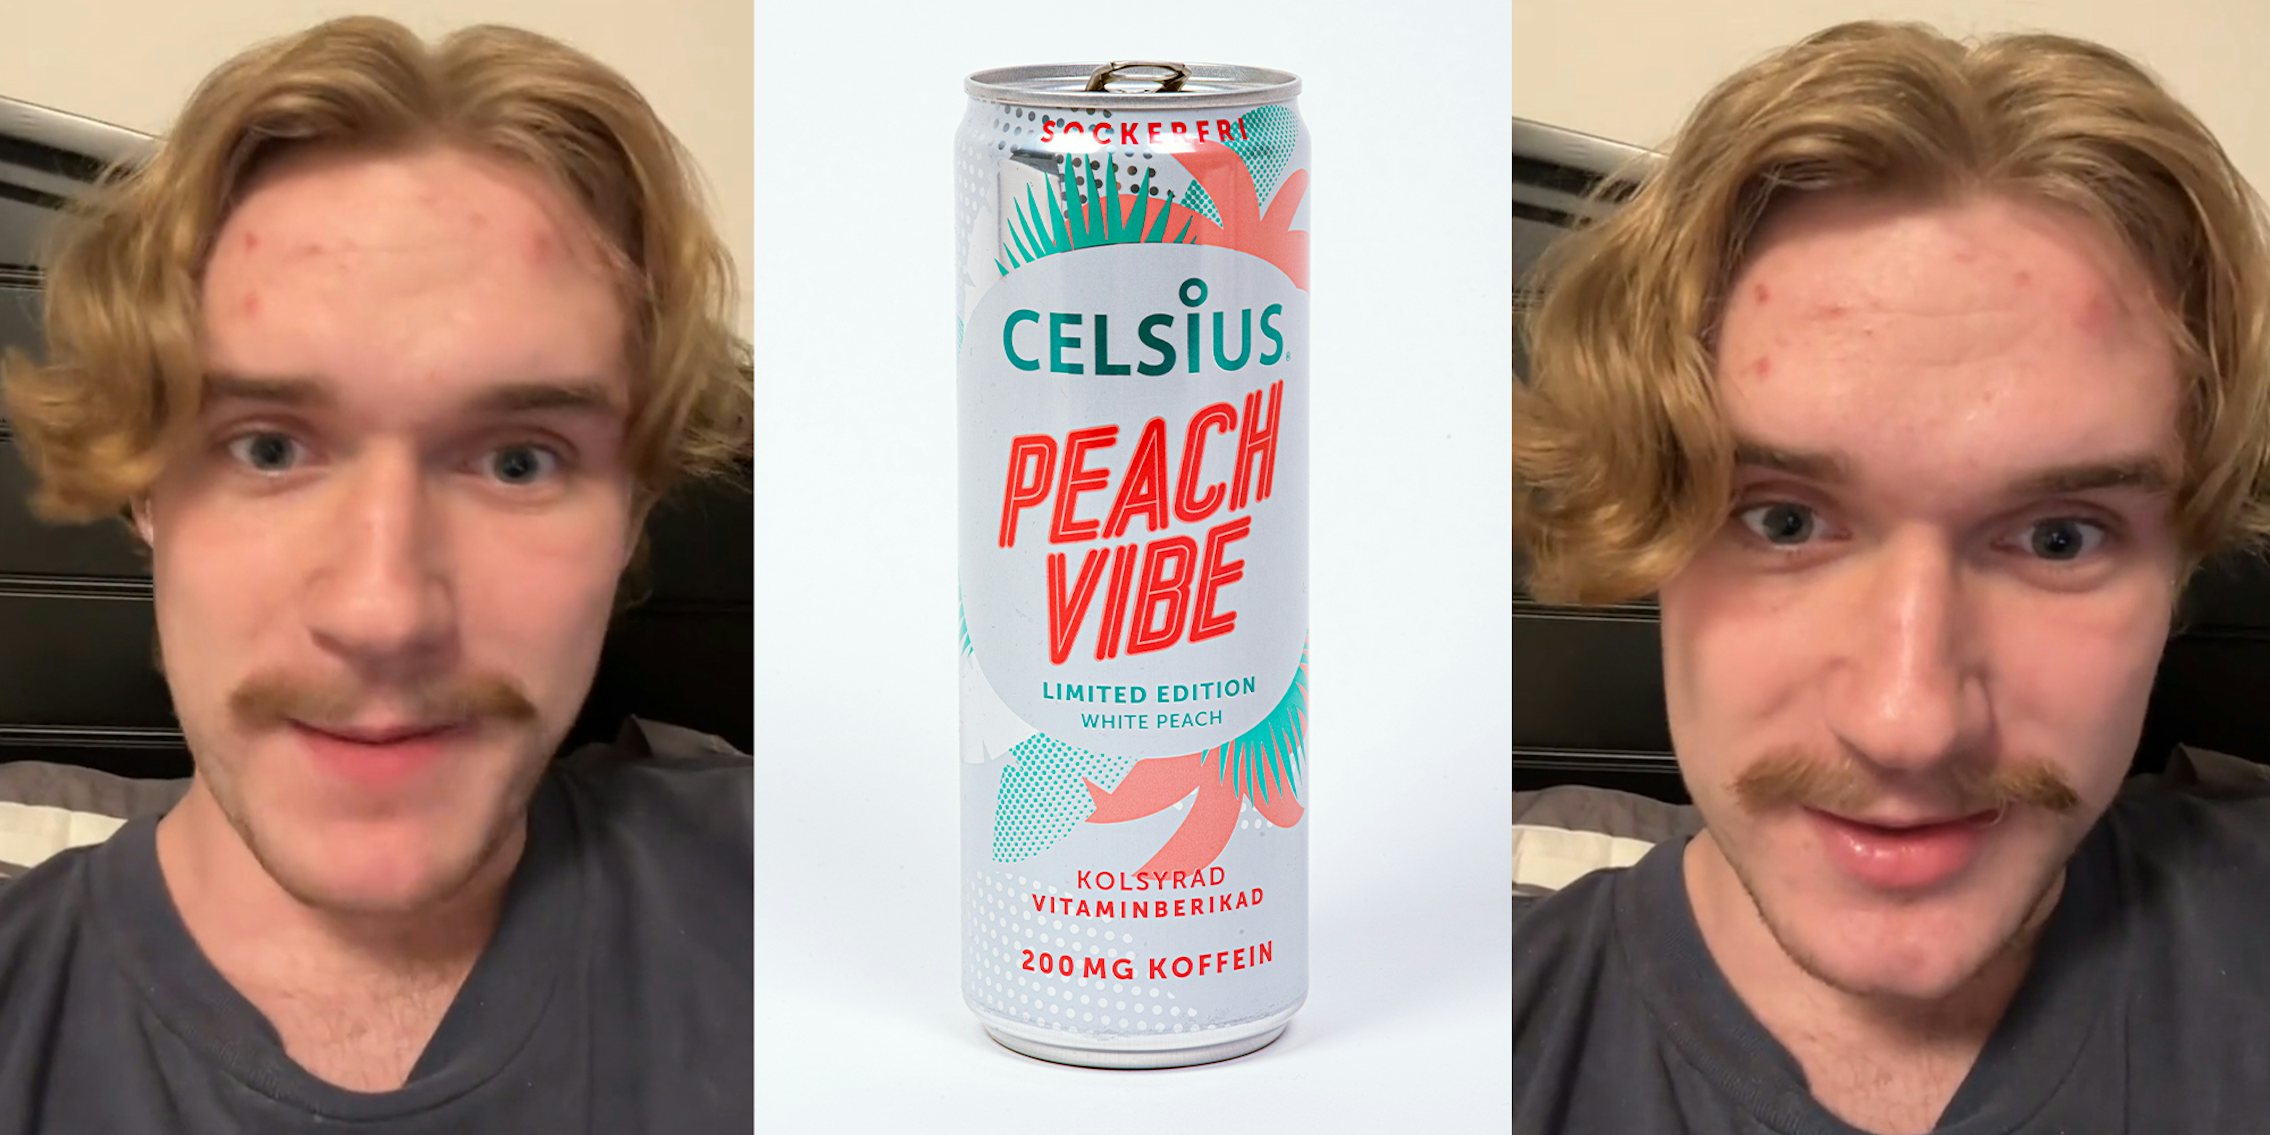 Man drinks 5 Celsius cans thinking they're an alcoholic beverage